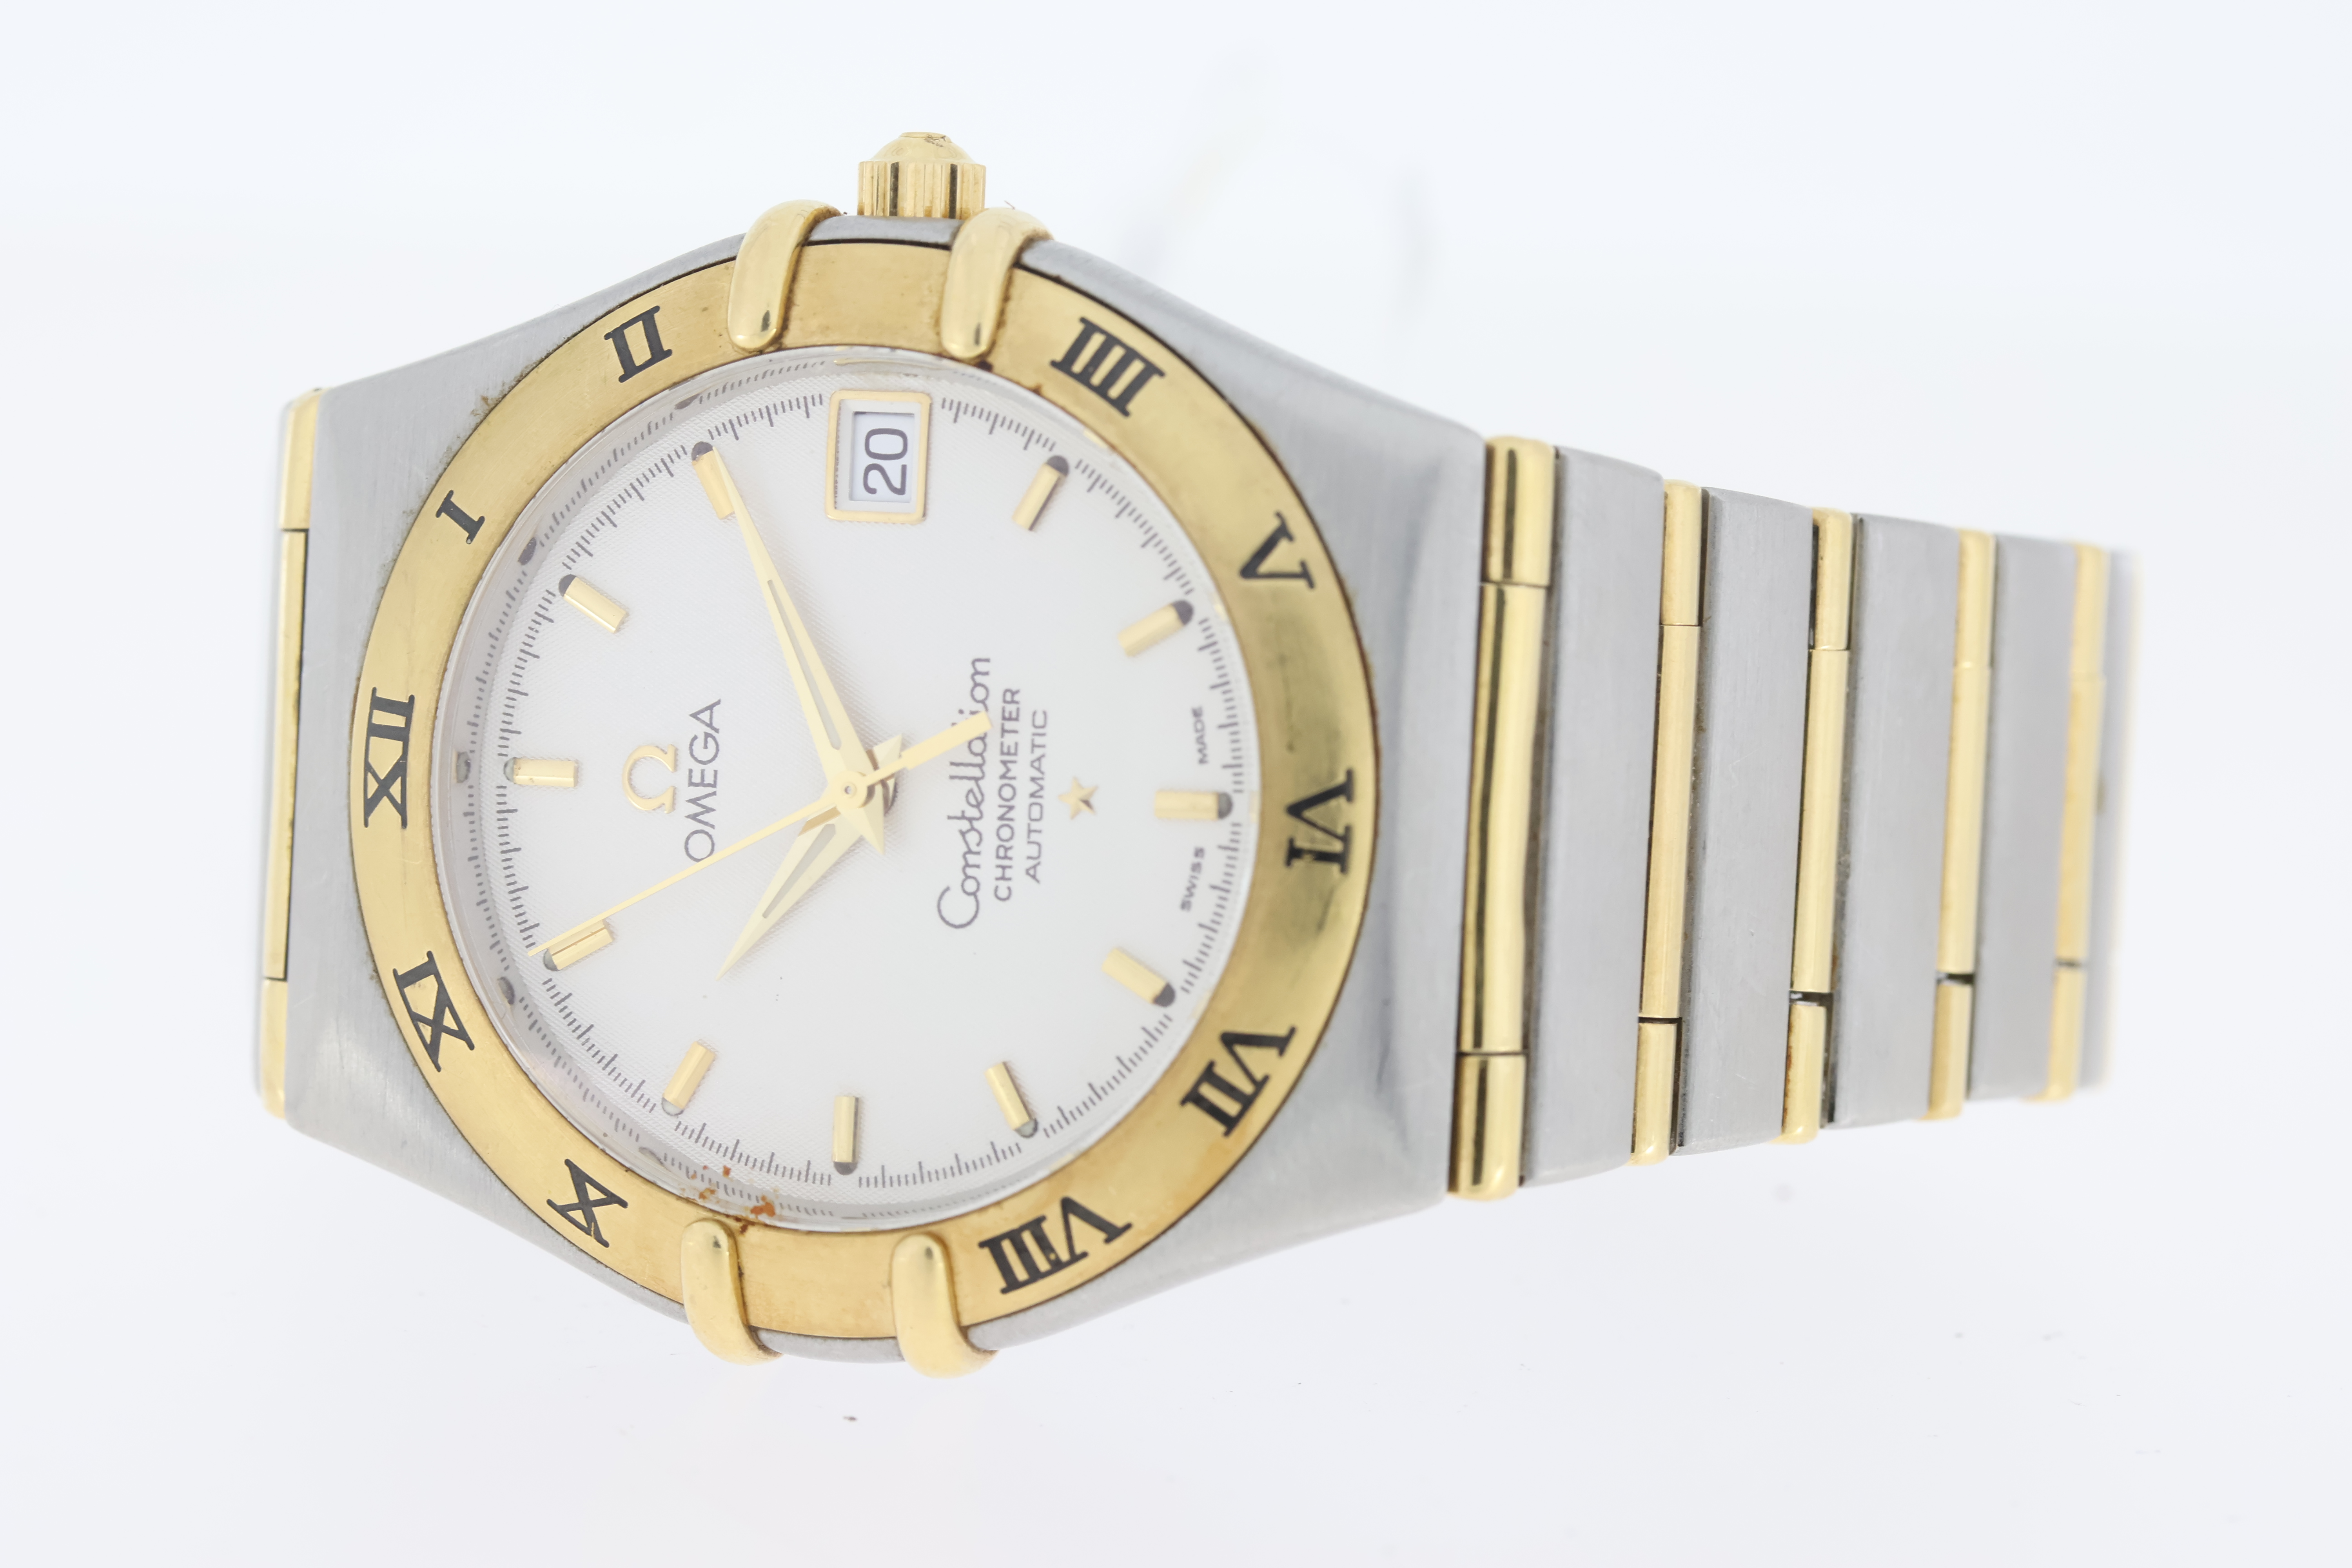 Omega Constellation Reference 368.1201 Circa 2000 - Image 2 of 4